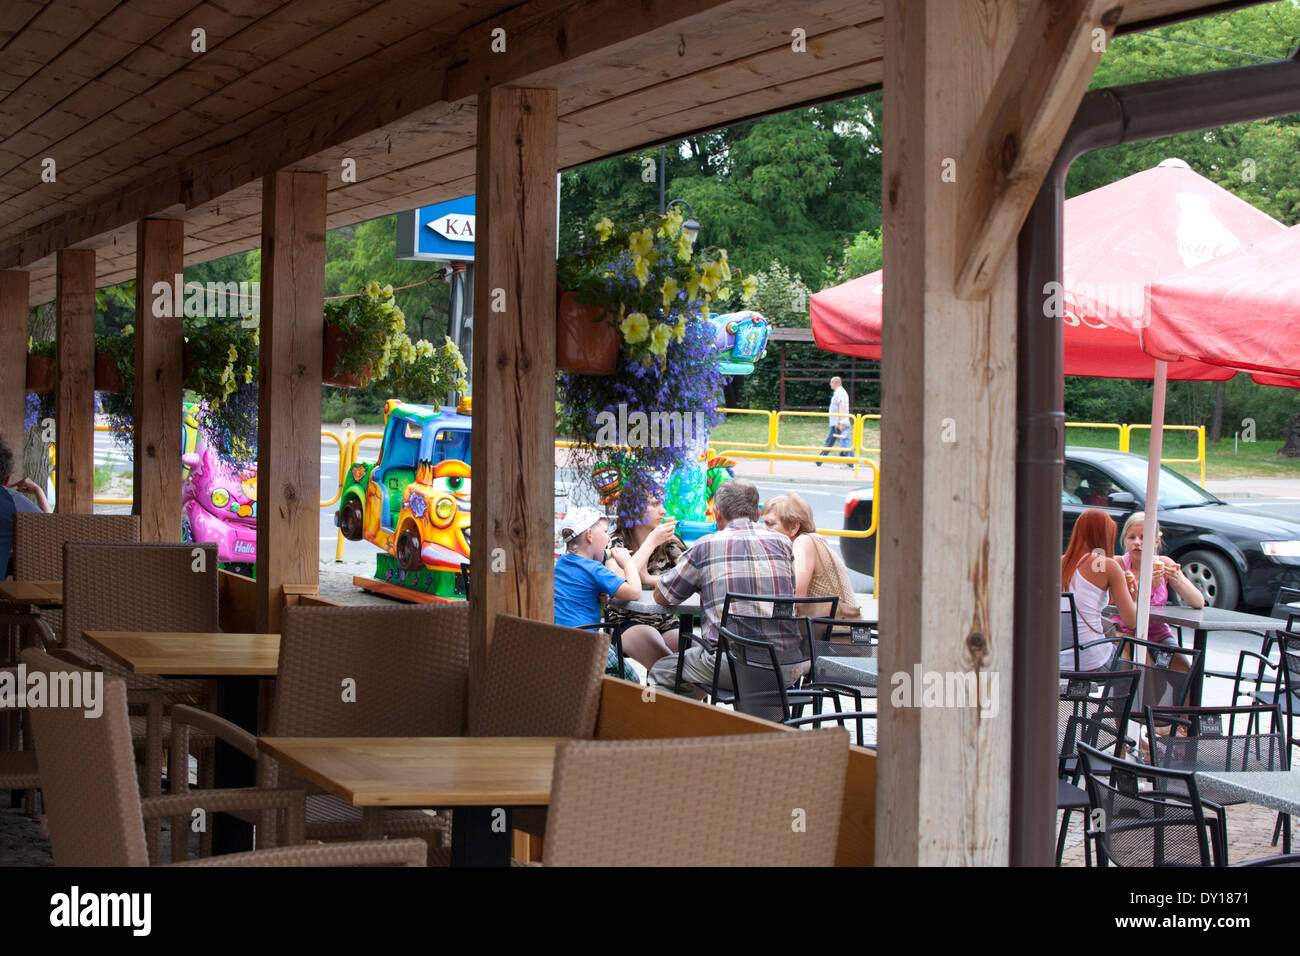 People enjoying ice cream cones in an outdoor restaurant. Spala Central Poland Stock Photo